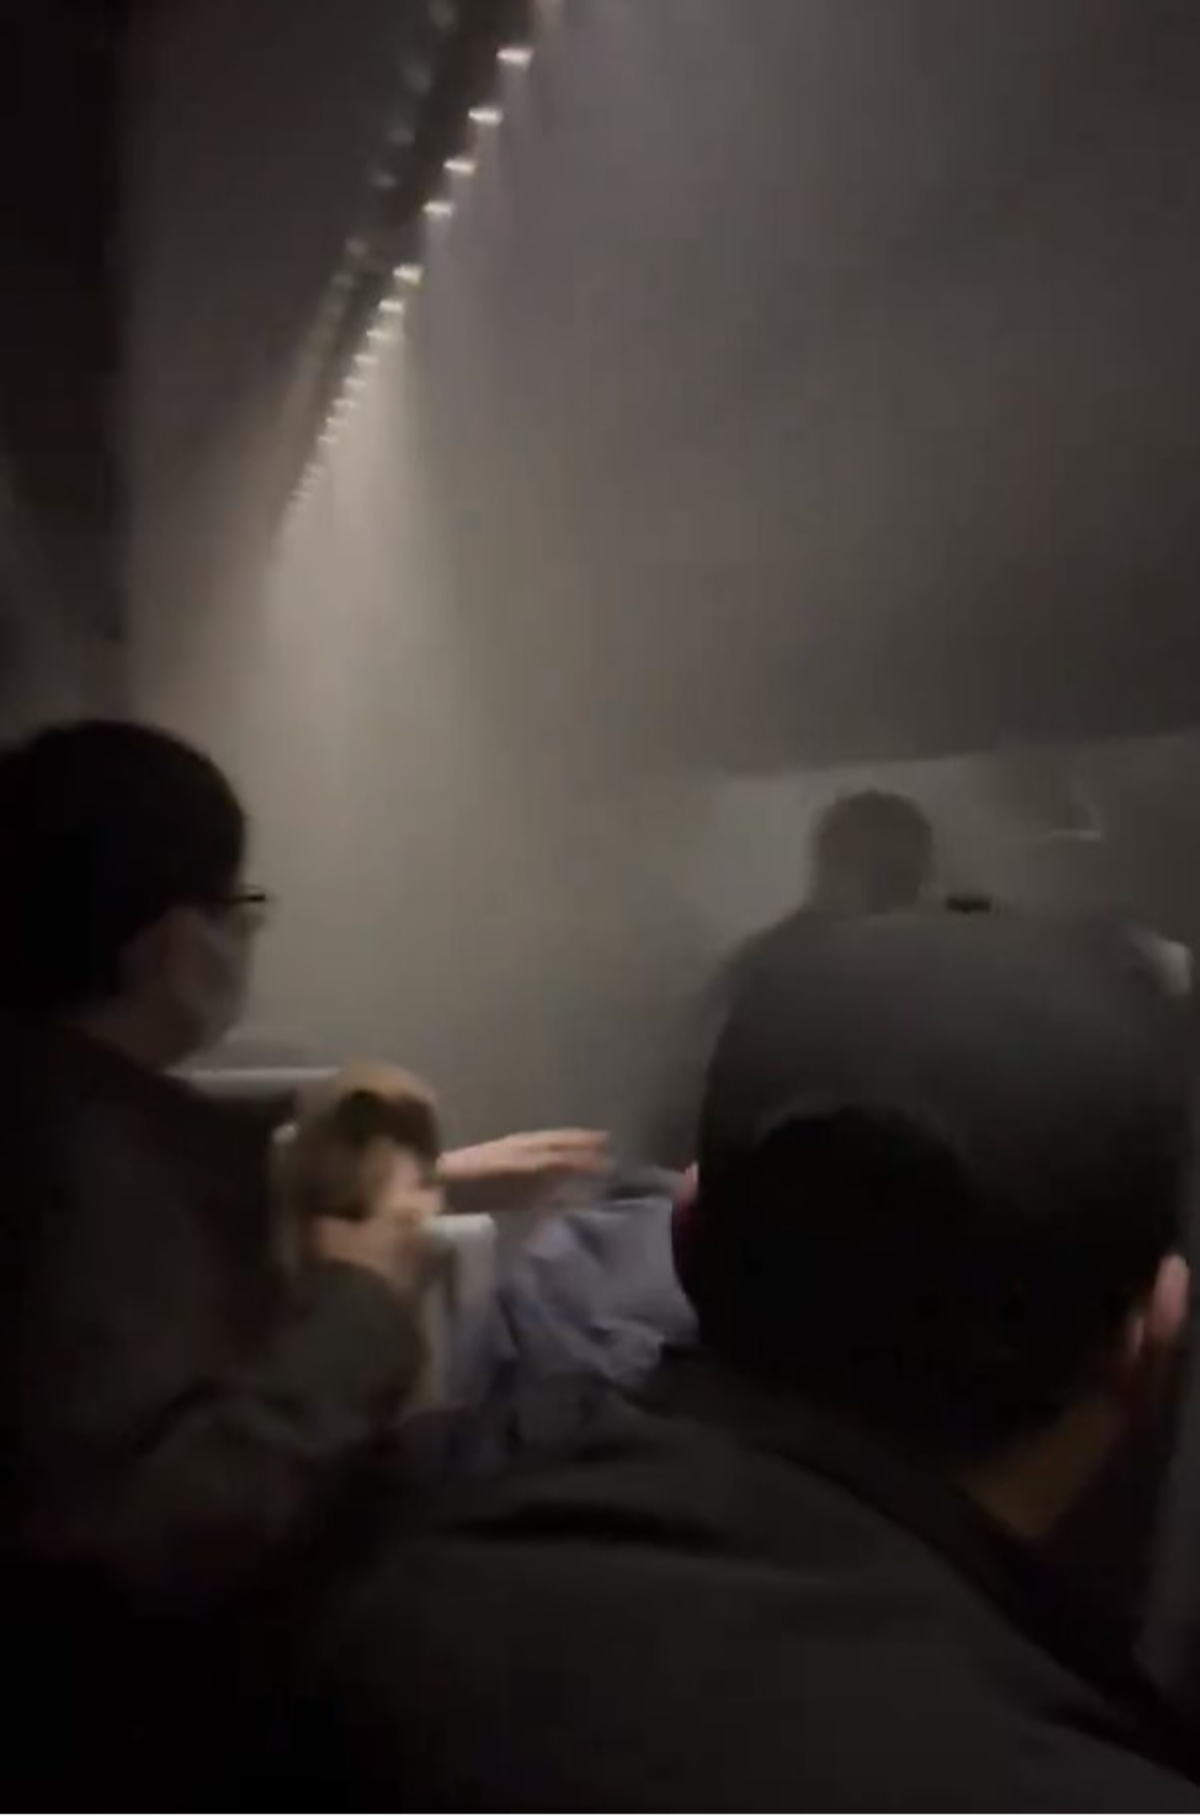 Video taken by a passenger shows inside of the Japan Airlines flight as it was on fire (X / @alto_maple)